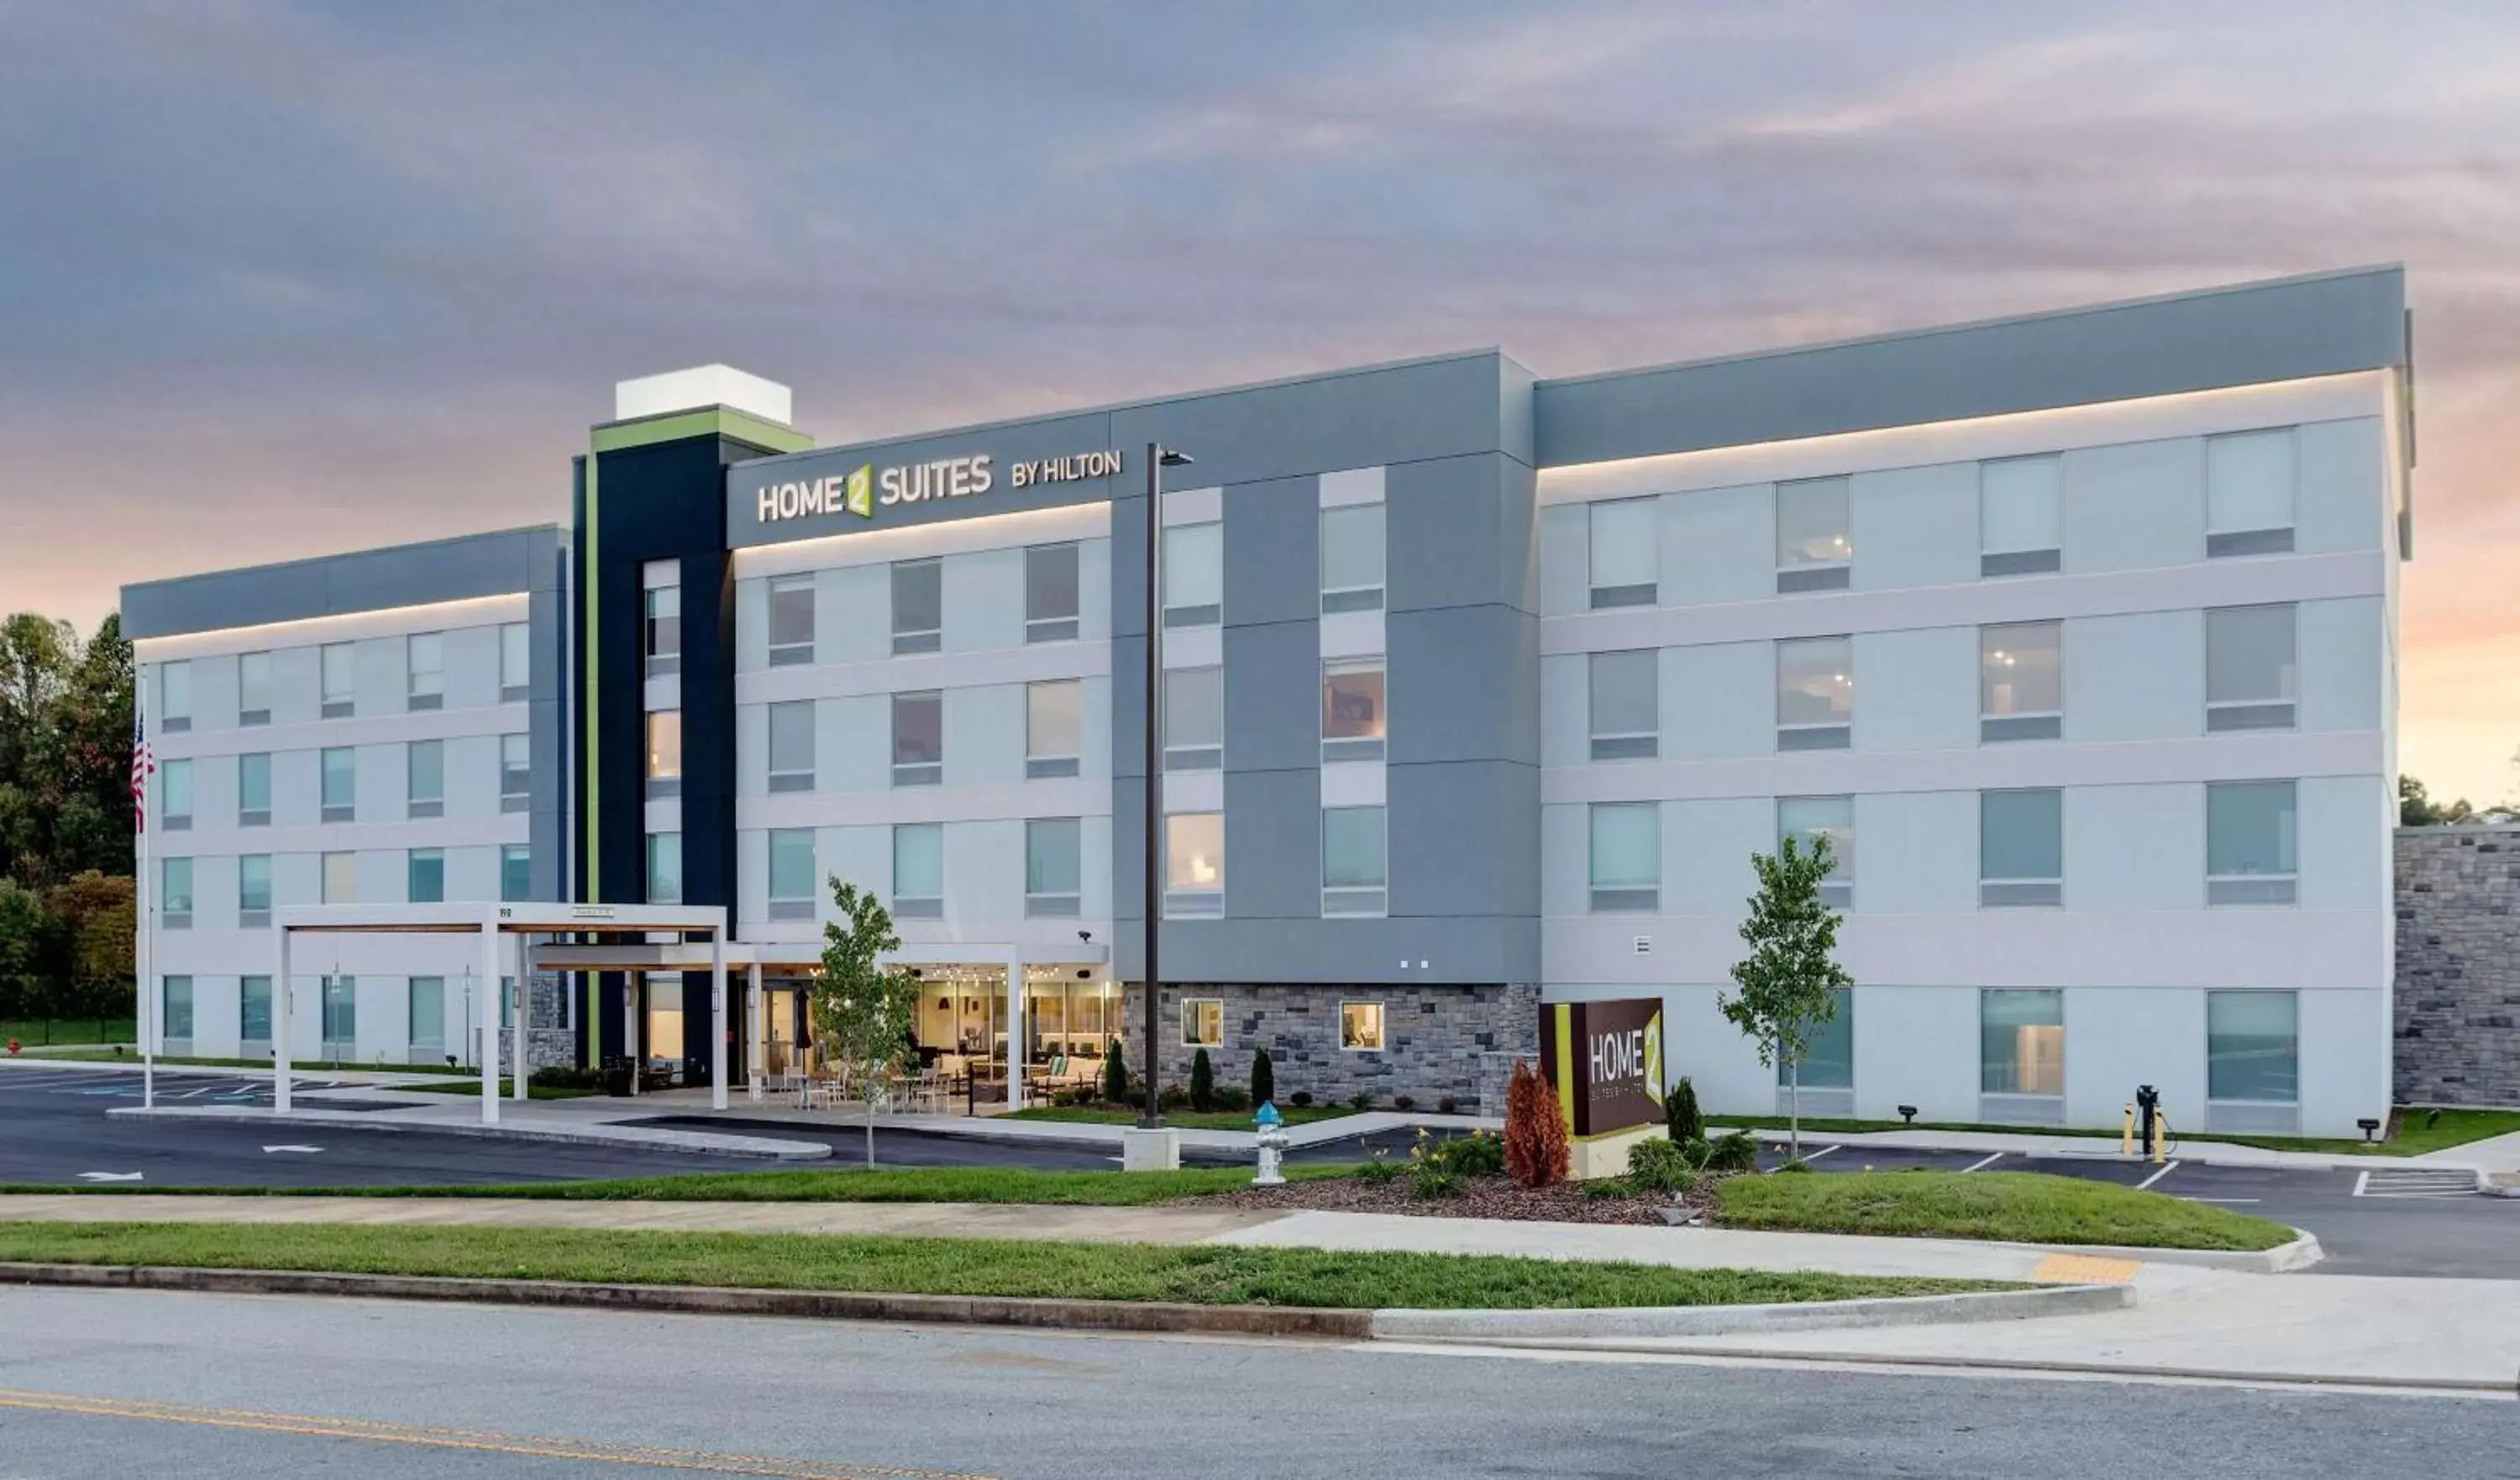 Property Building in Home2 Suites By Hilton Johnson City, Tn